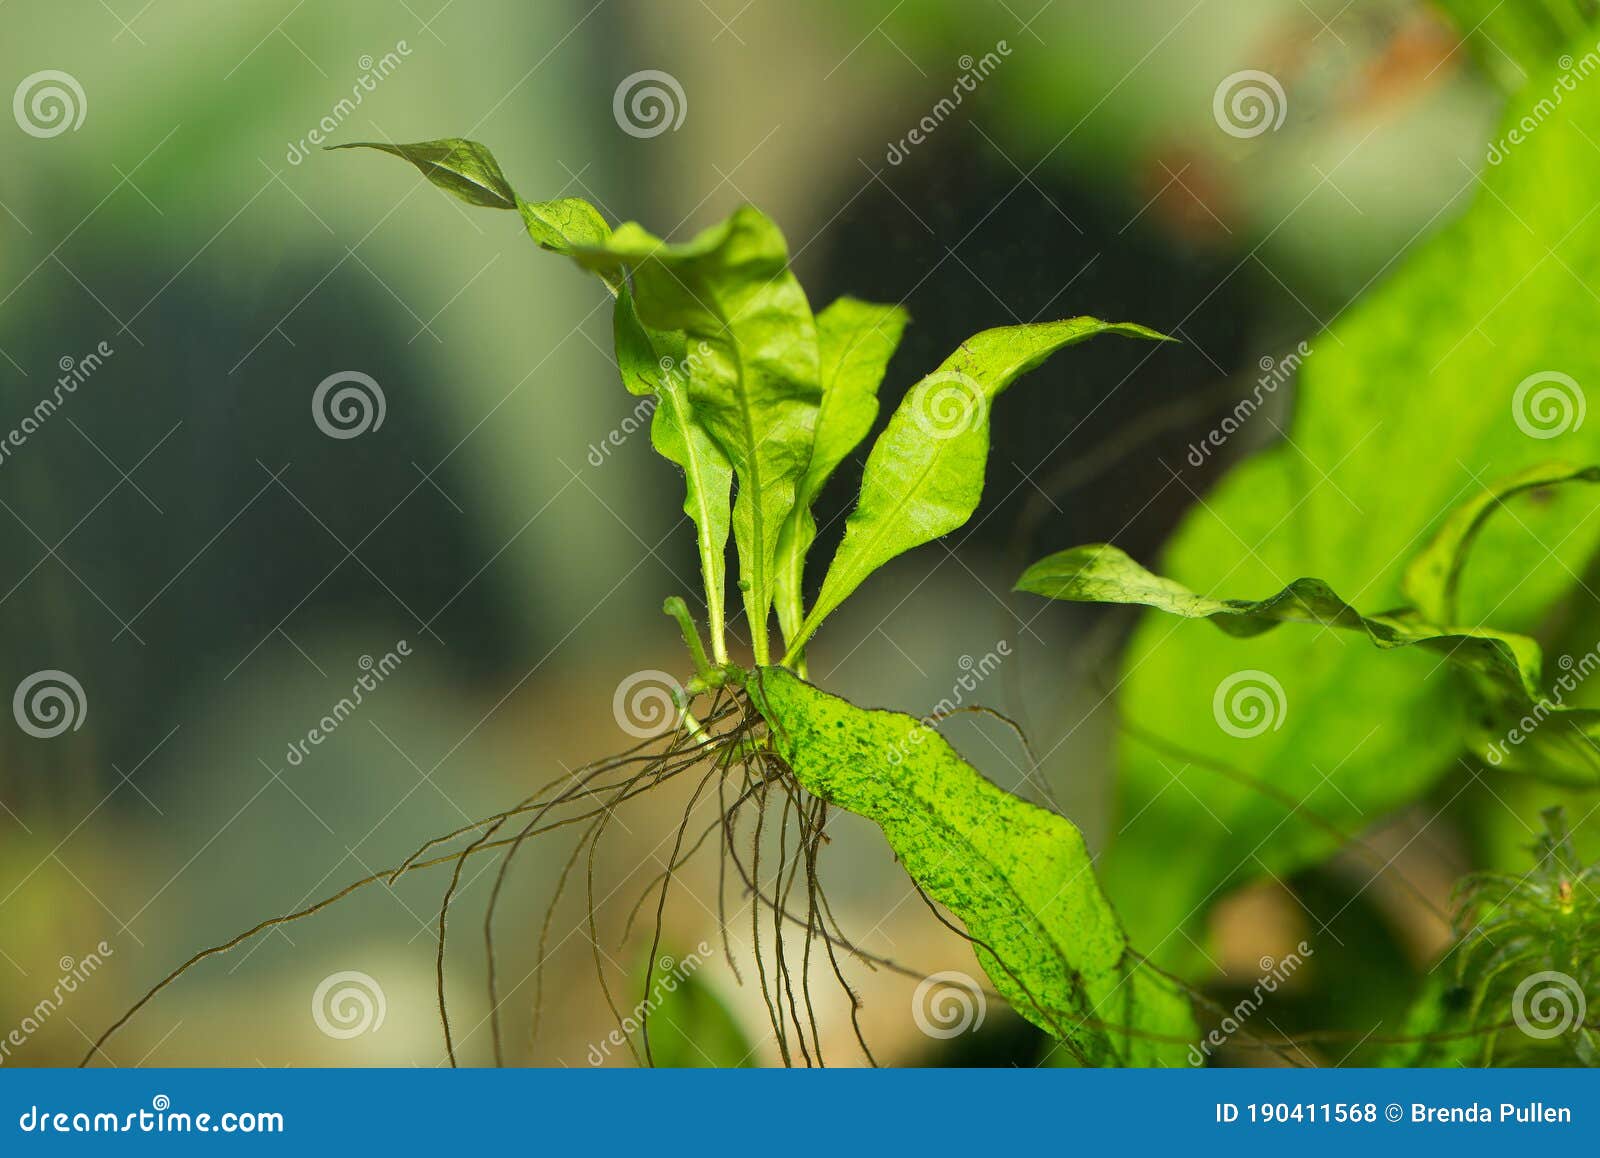 a java fern plantlet growing on the mother plant in aquarium